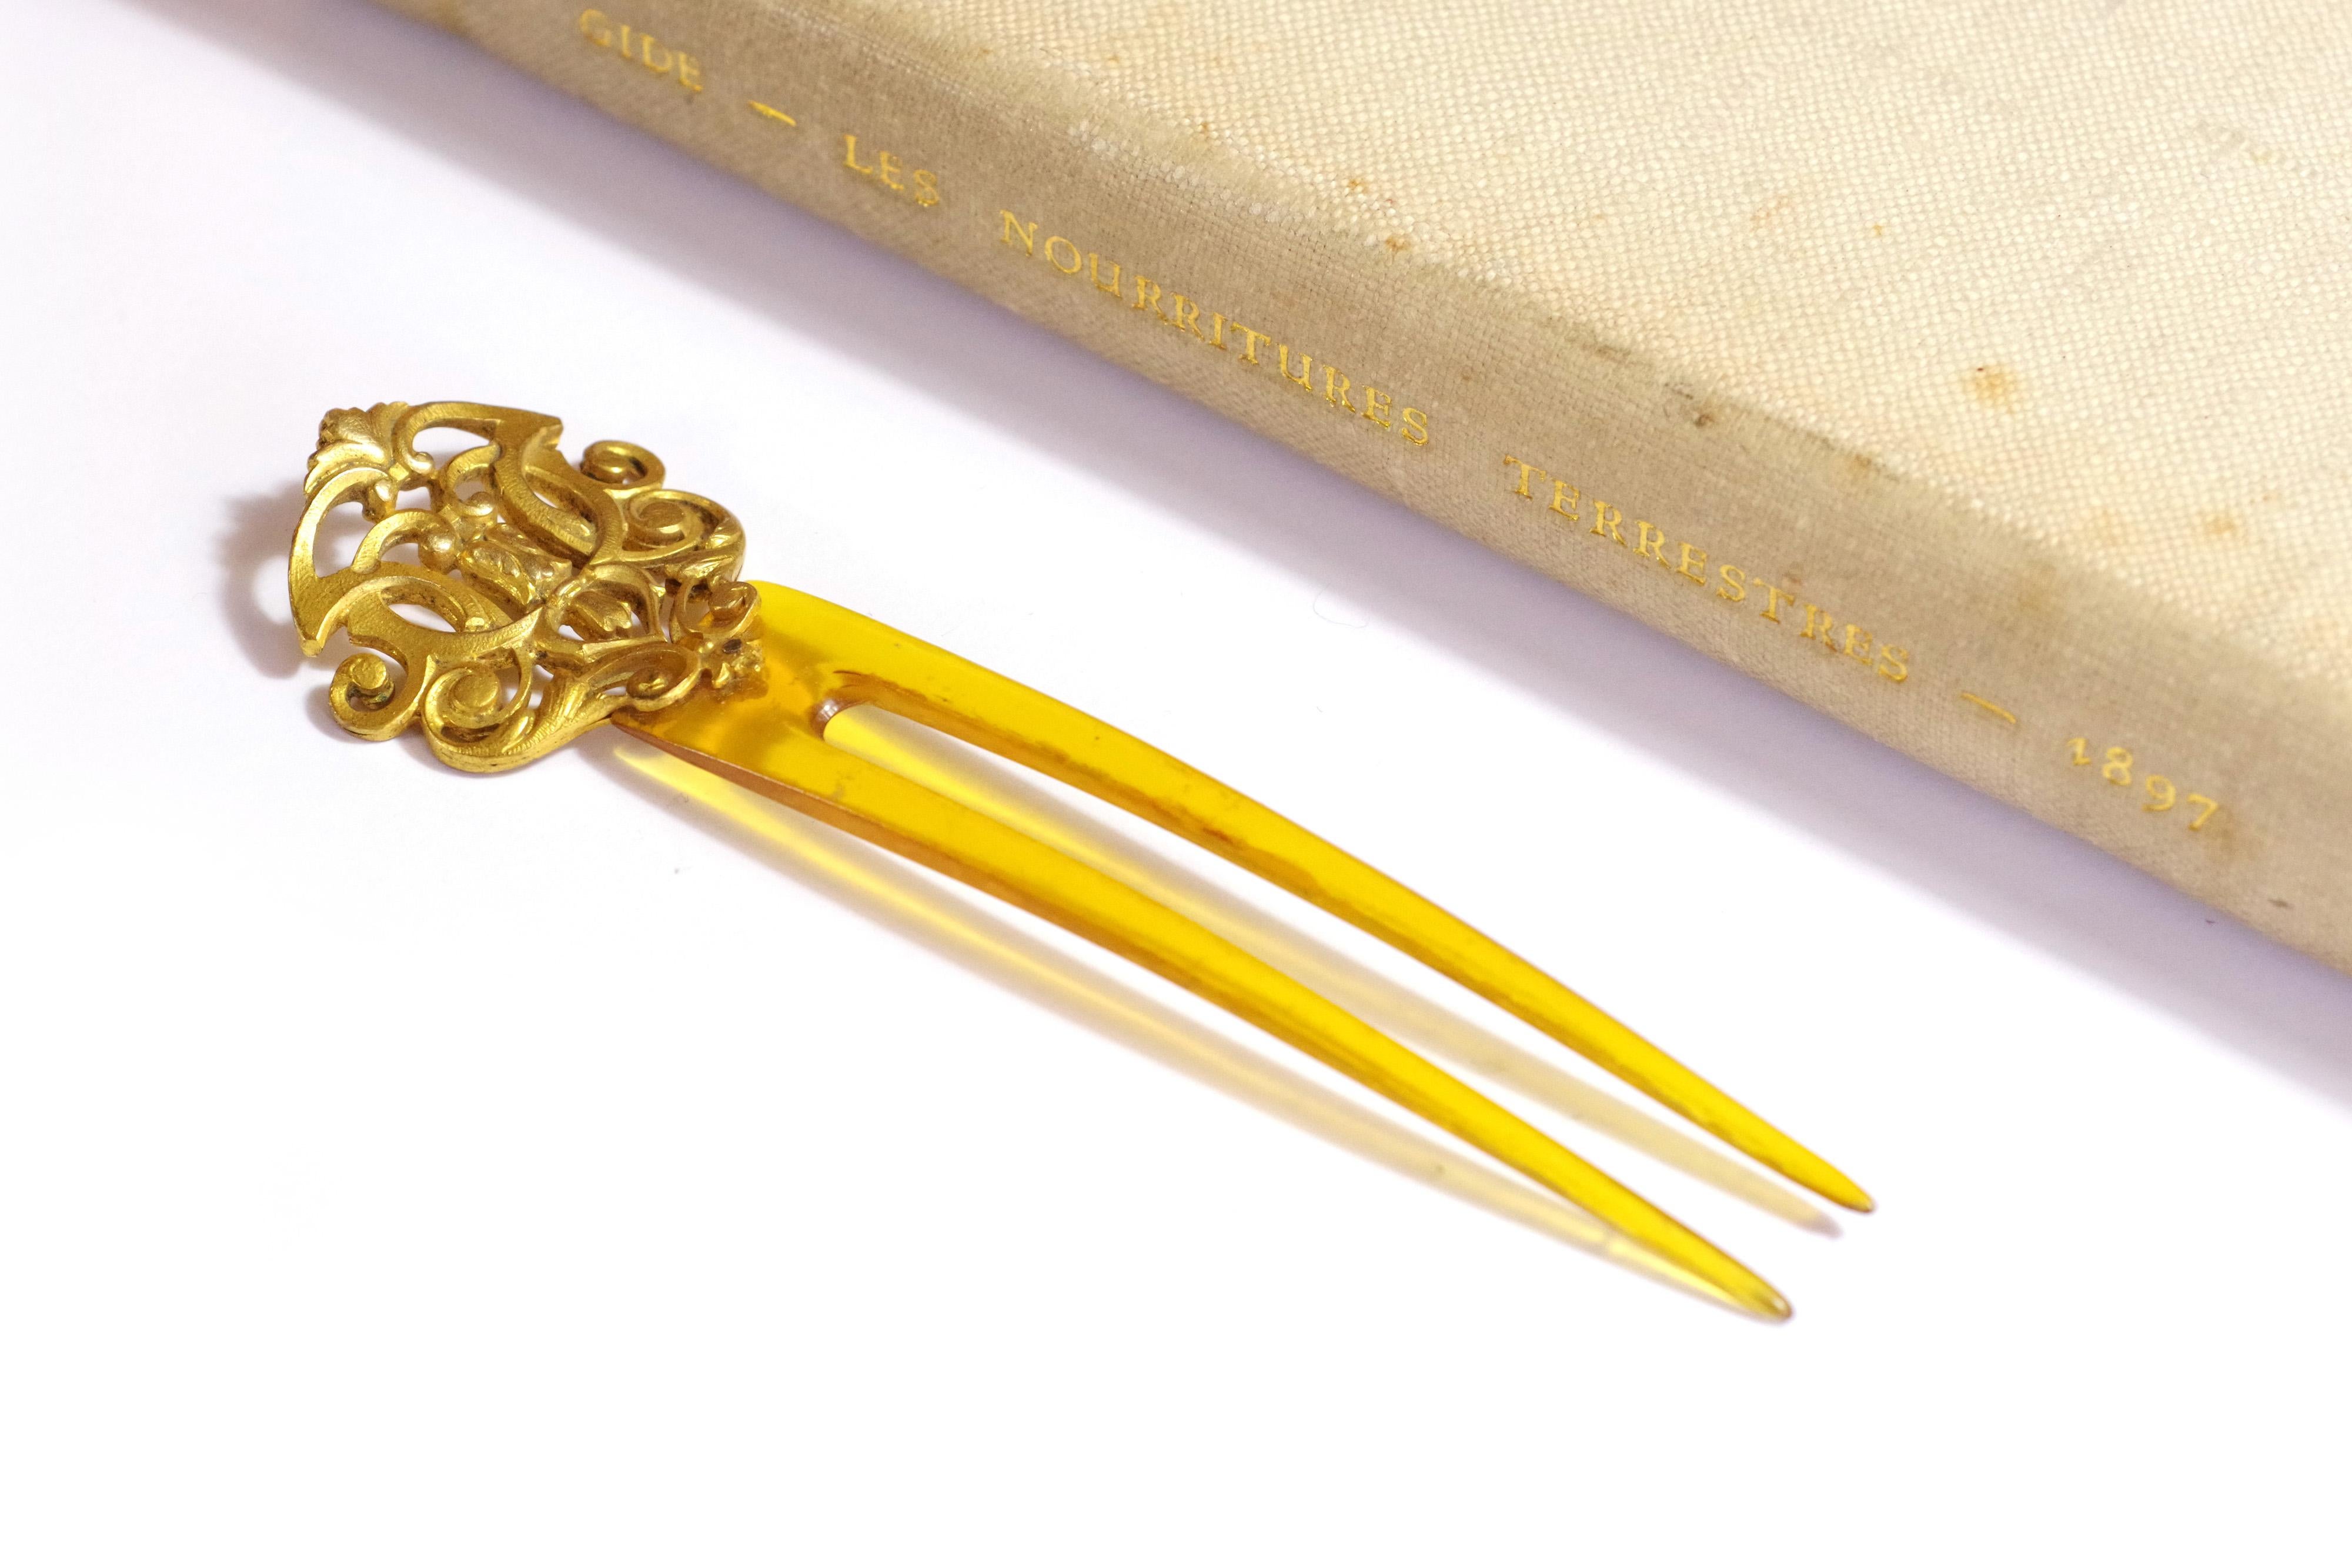 Edwardian hair pin for bun in the style of Jules Wiese. Jewel for head with an openwork motif in gilded bronze decorated with scrolls. This bronze element is attached to a hairpin made of blond organic material (tortoise shell). Antique hairpin from